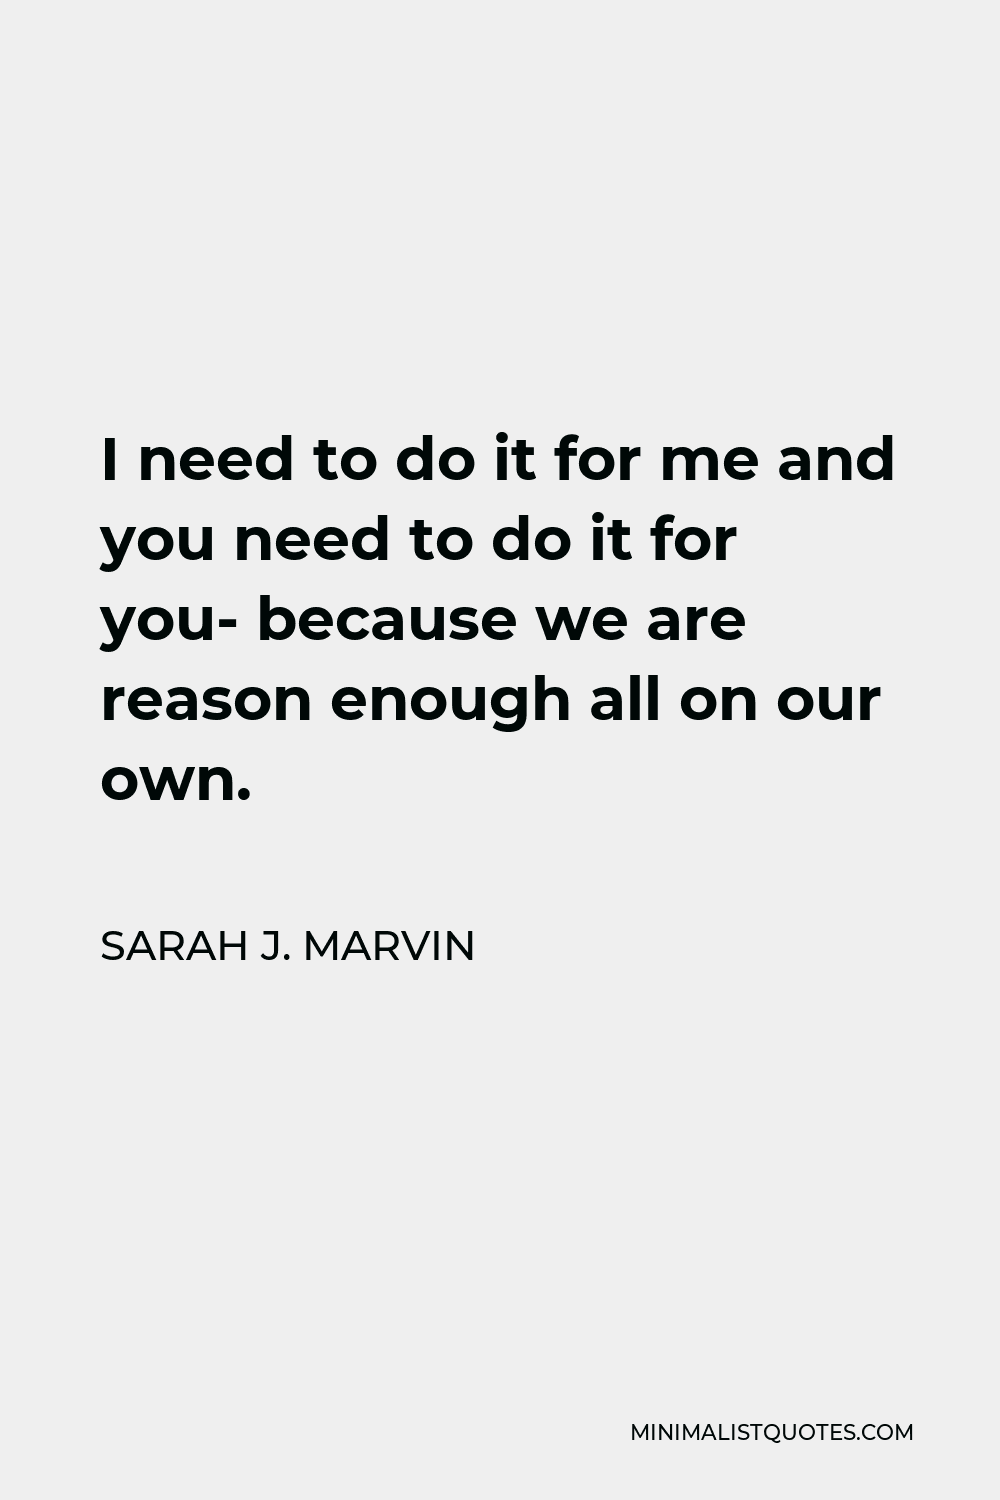 Sarah J. Marvin Quote - I need to do it for me and you need to do it for you- because we are reason enough all on our own.